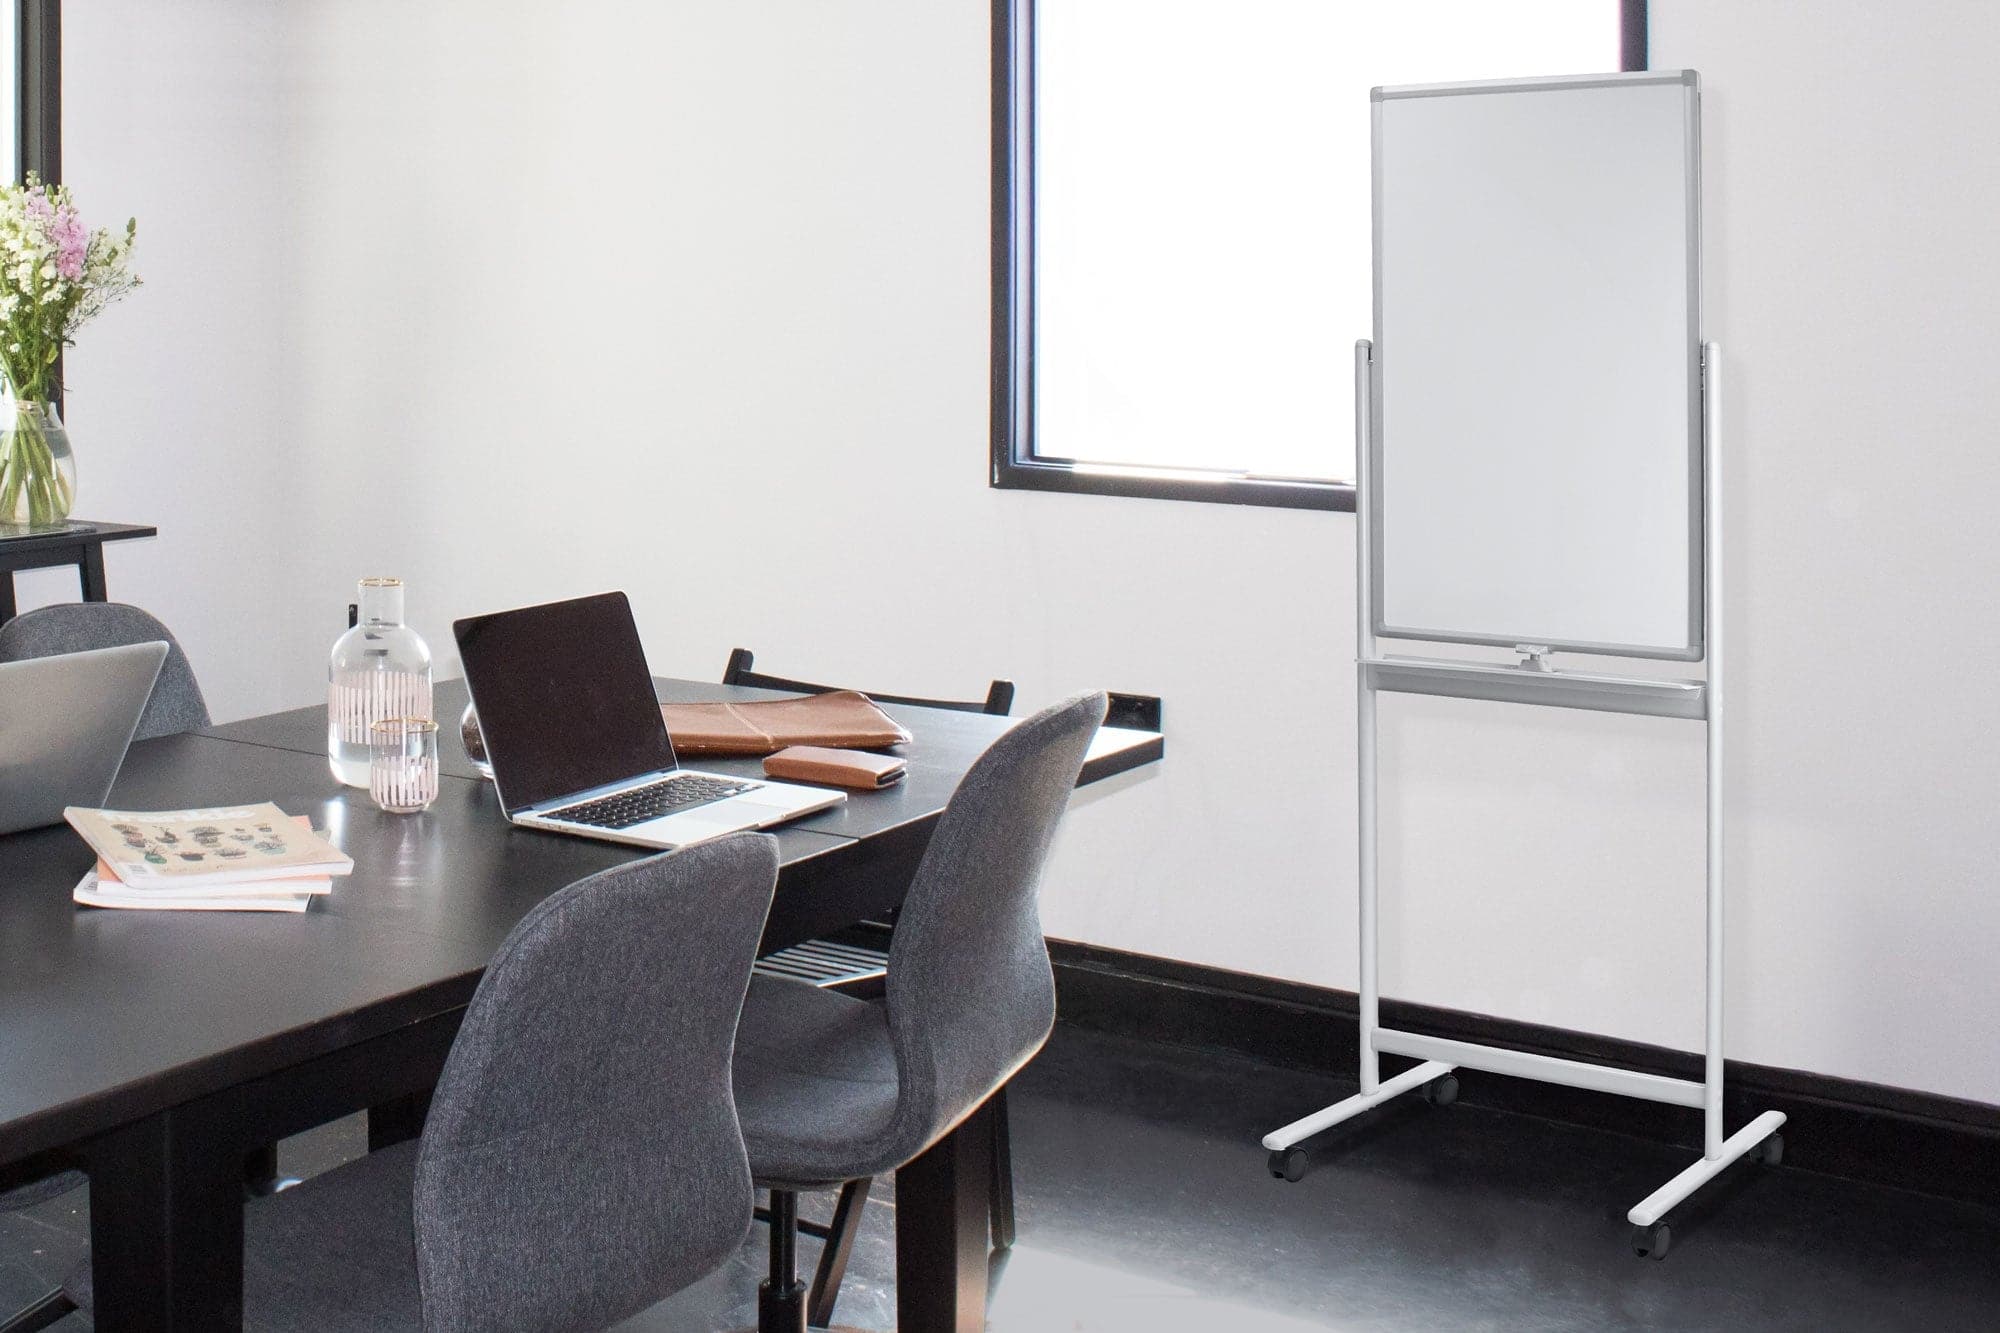 Mobile Double Sided Whiteboard – VIVO - desk solutions, screen mounting,  and more